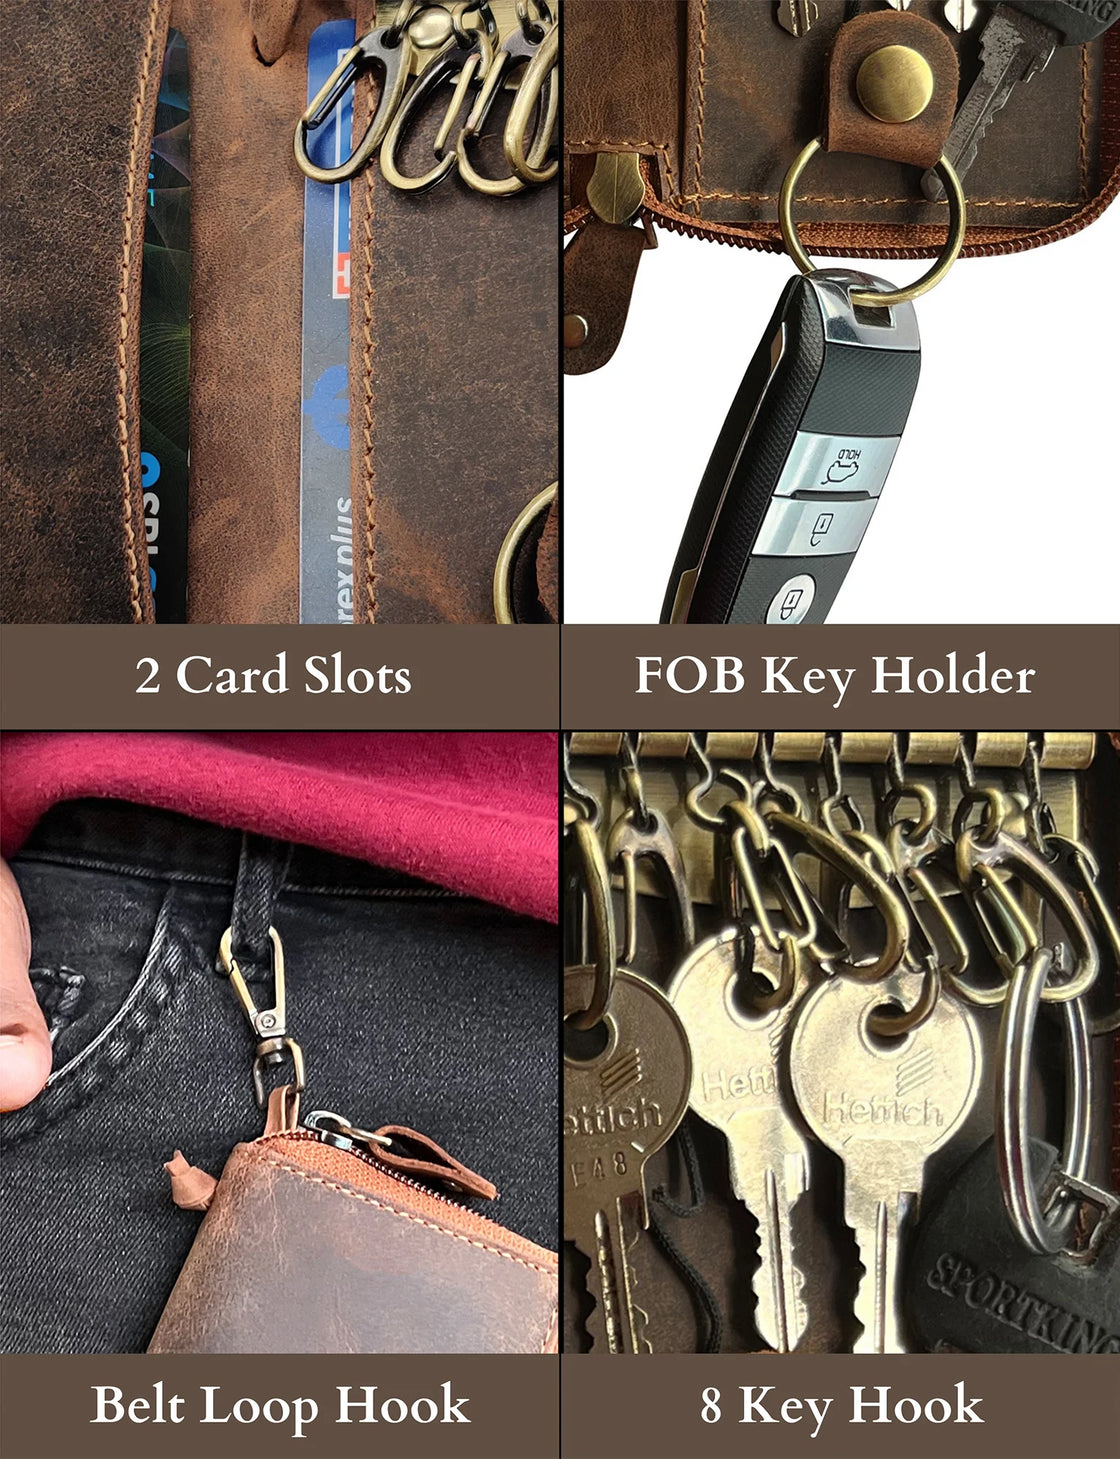 RUSTIC TOWN Leather Key Holder Case - Zippered Key Organizer Wallet with 8  Hooks for Keys, Cash & Card - Gift for Men and Women